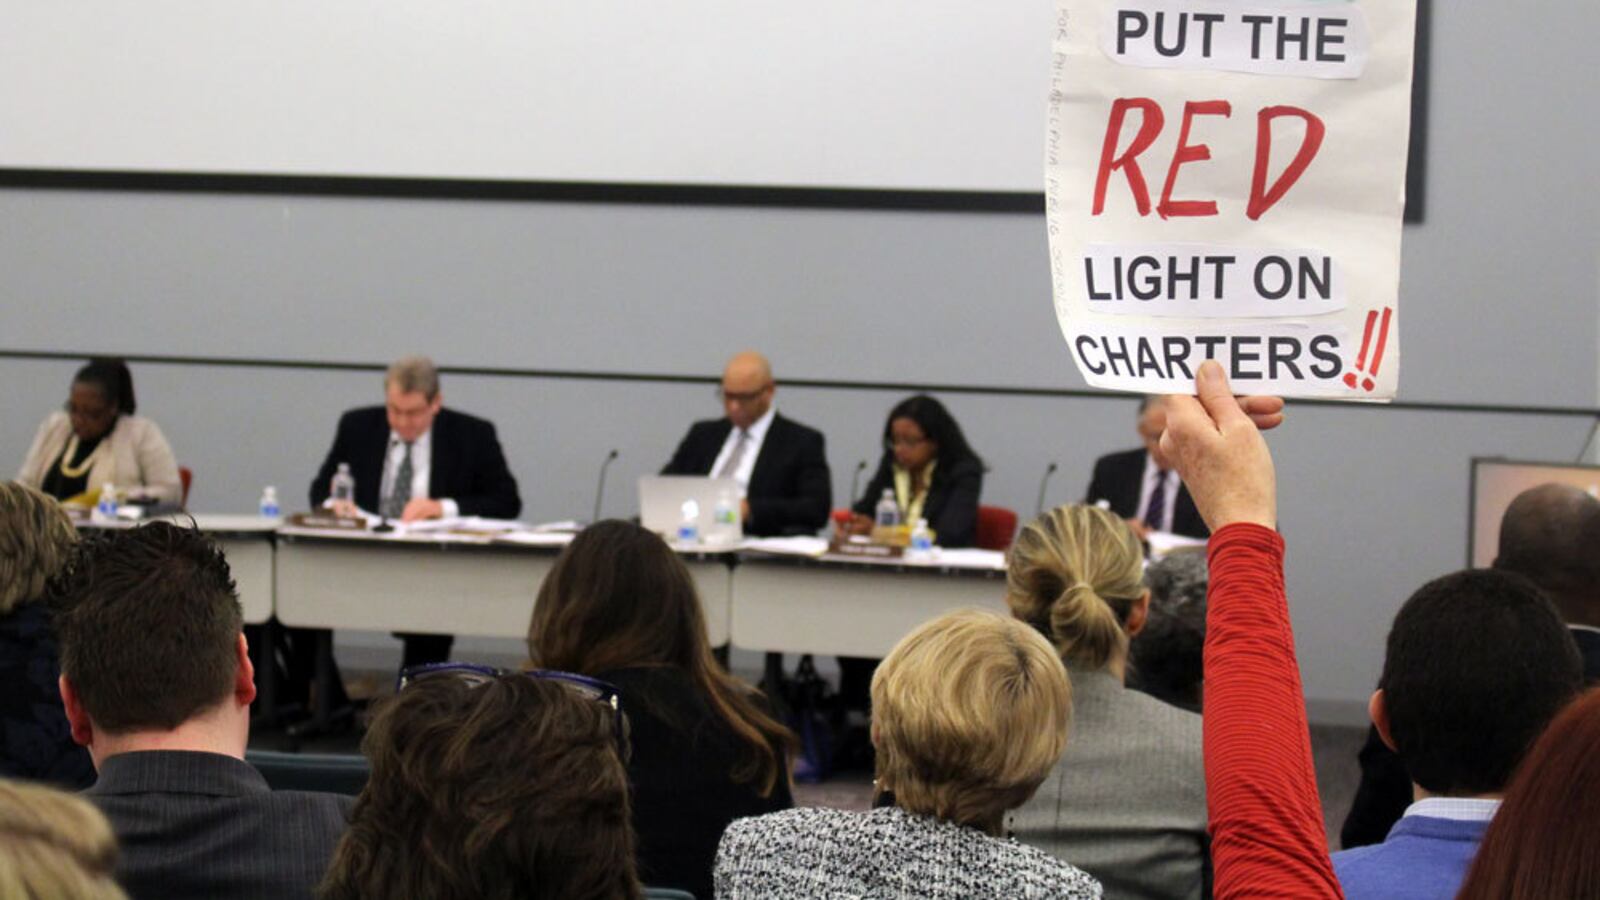 A sign being held up by an audience member at a meeting that reads: Green: put the RED light on charters!